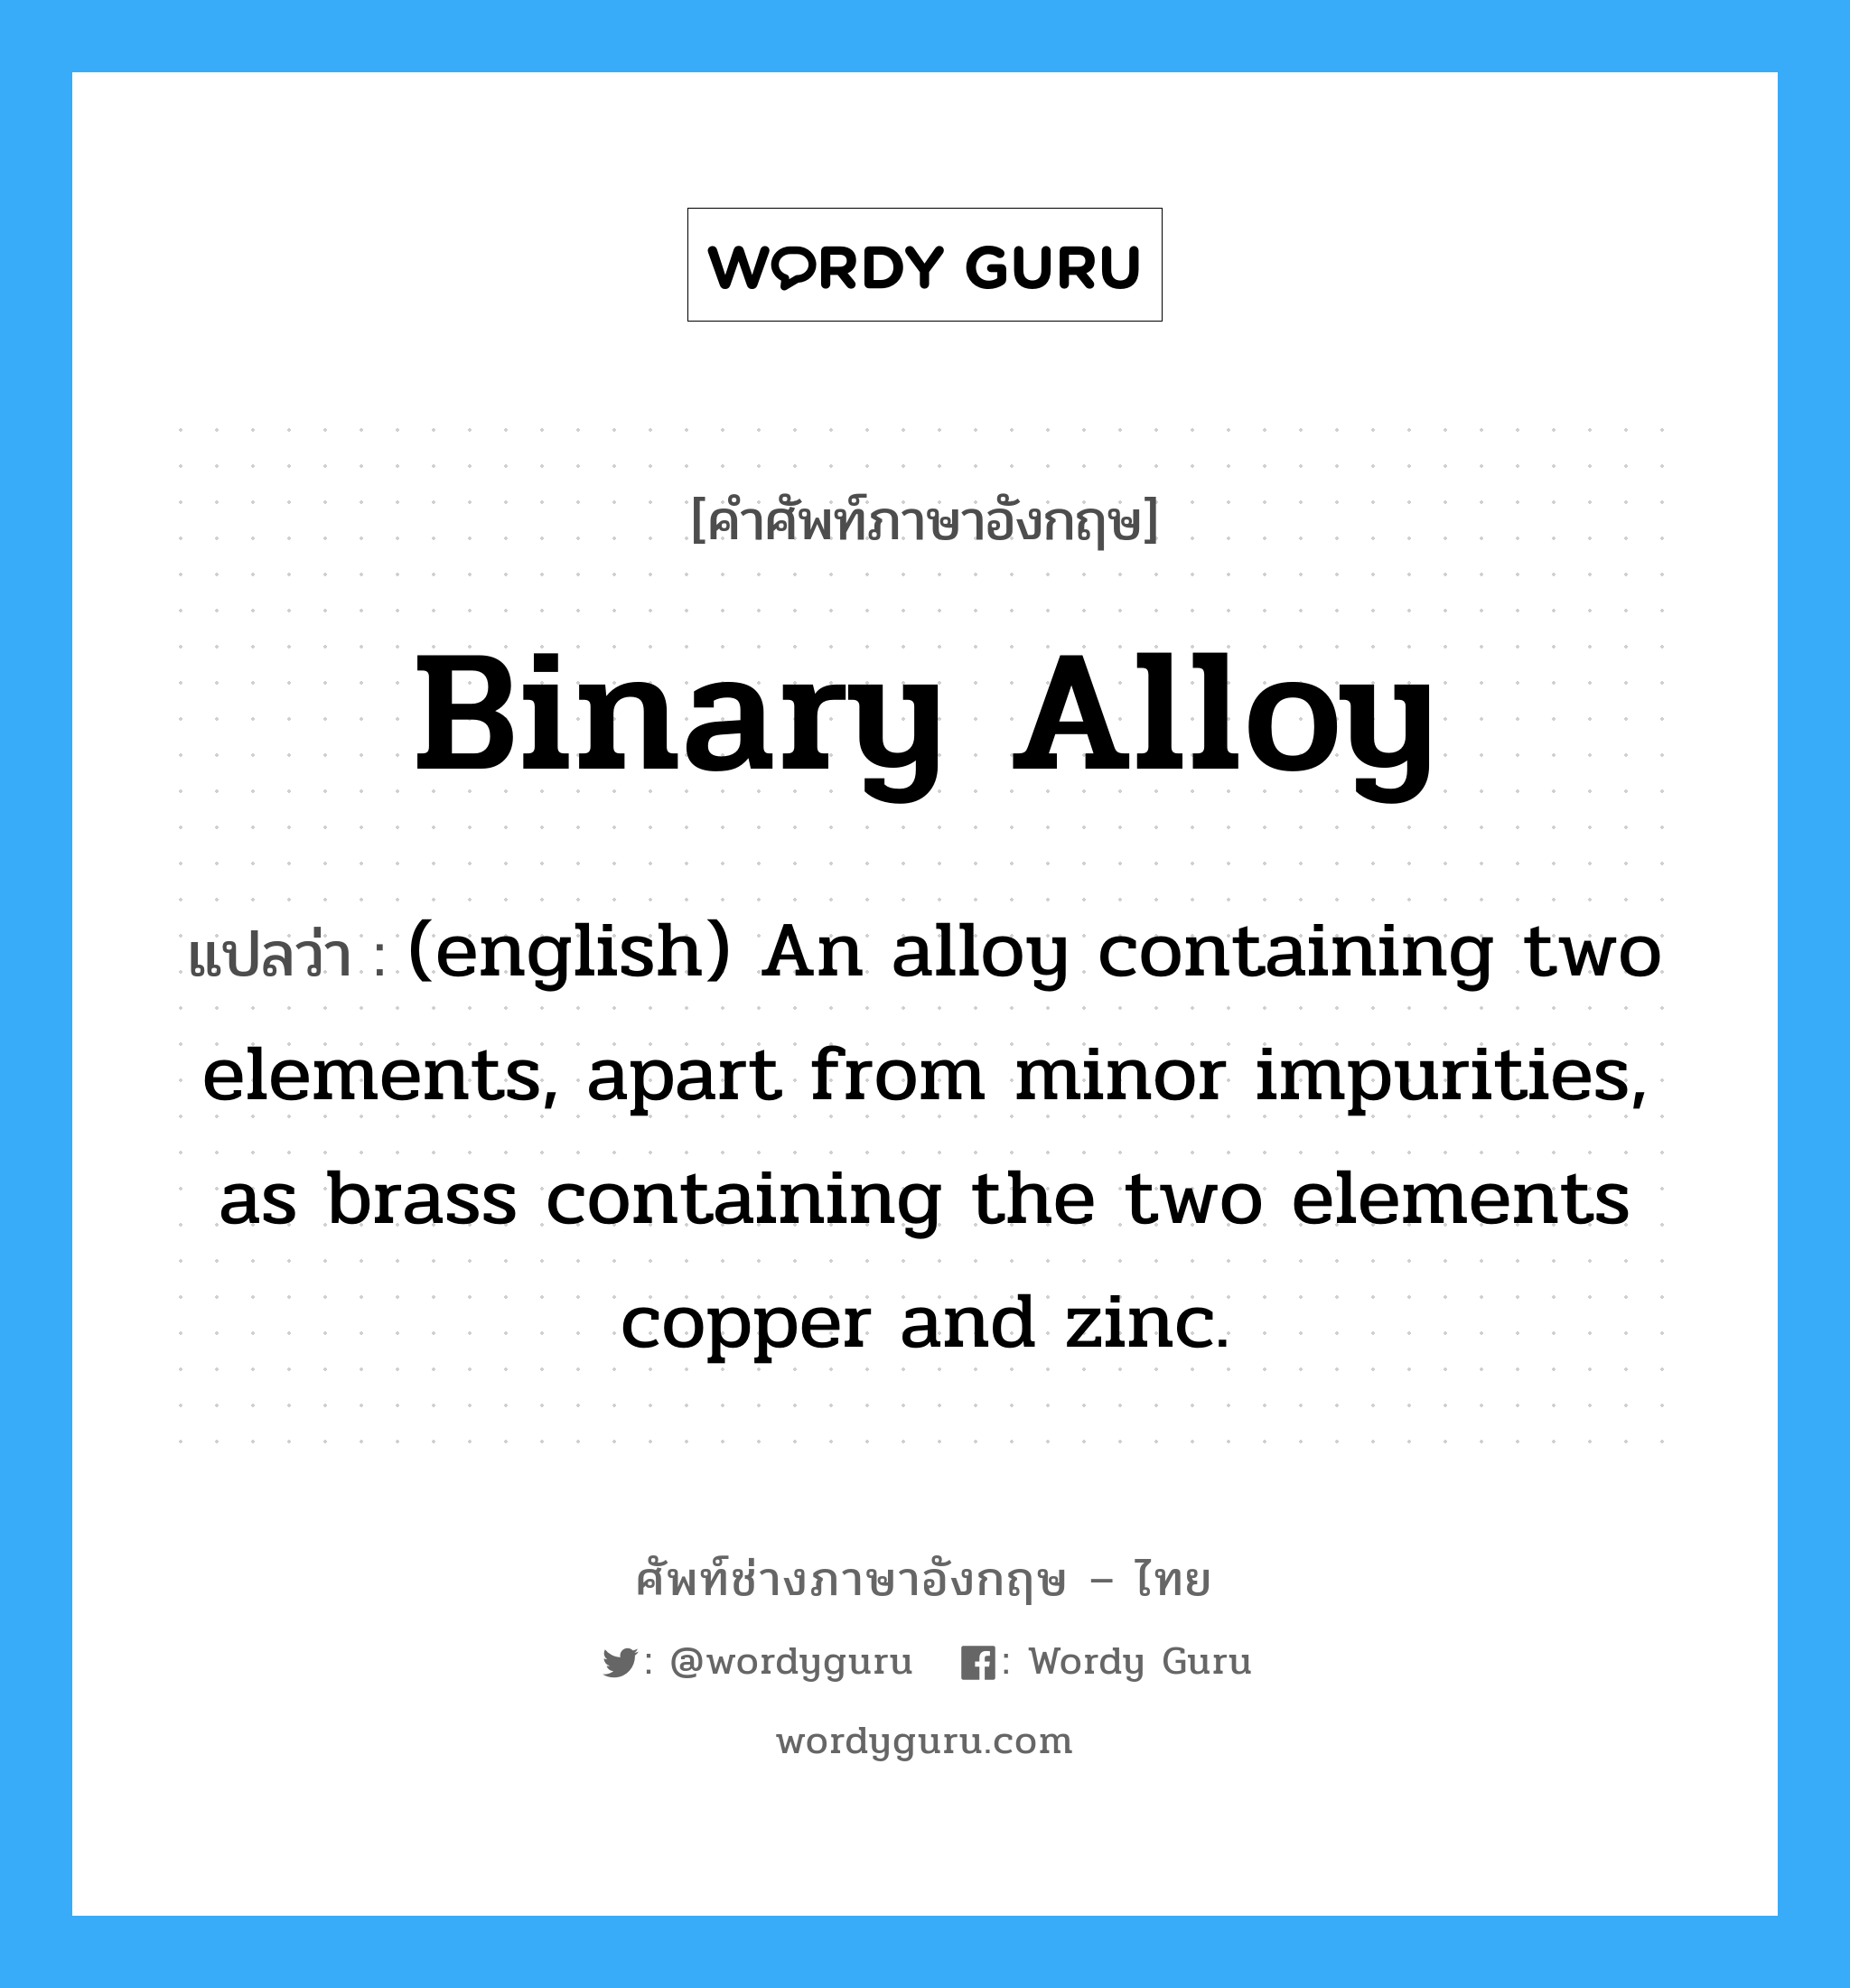 Binary Alloy แปลว่า?, คำศัพท์ช่างภาษาอังกฤษ - ไทย Binary Alloy คำศัพท์ภาษาอังกฤษ Binary Alloy แปลว่า (english) An alloy containing two elements, apart from minor impurities, as brass containing the two elements copper and zinc.